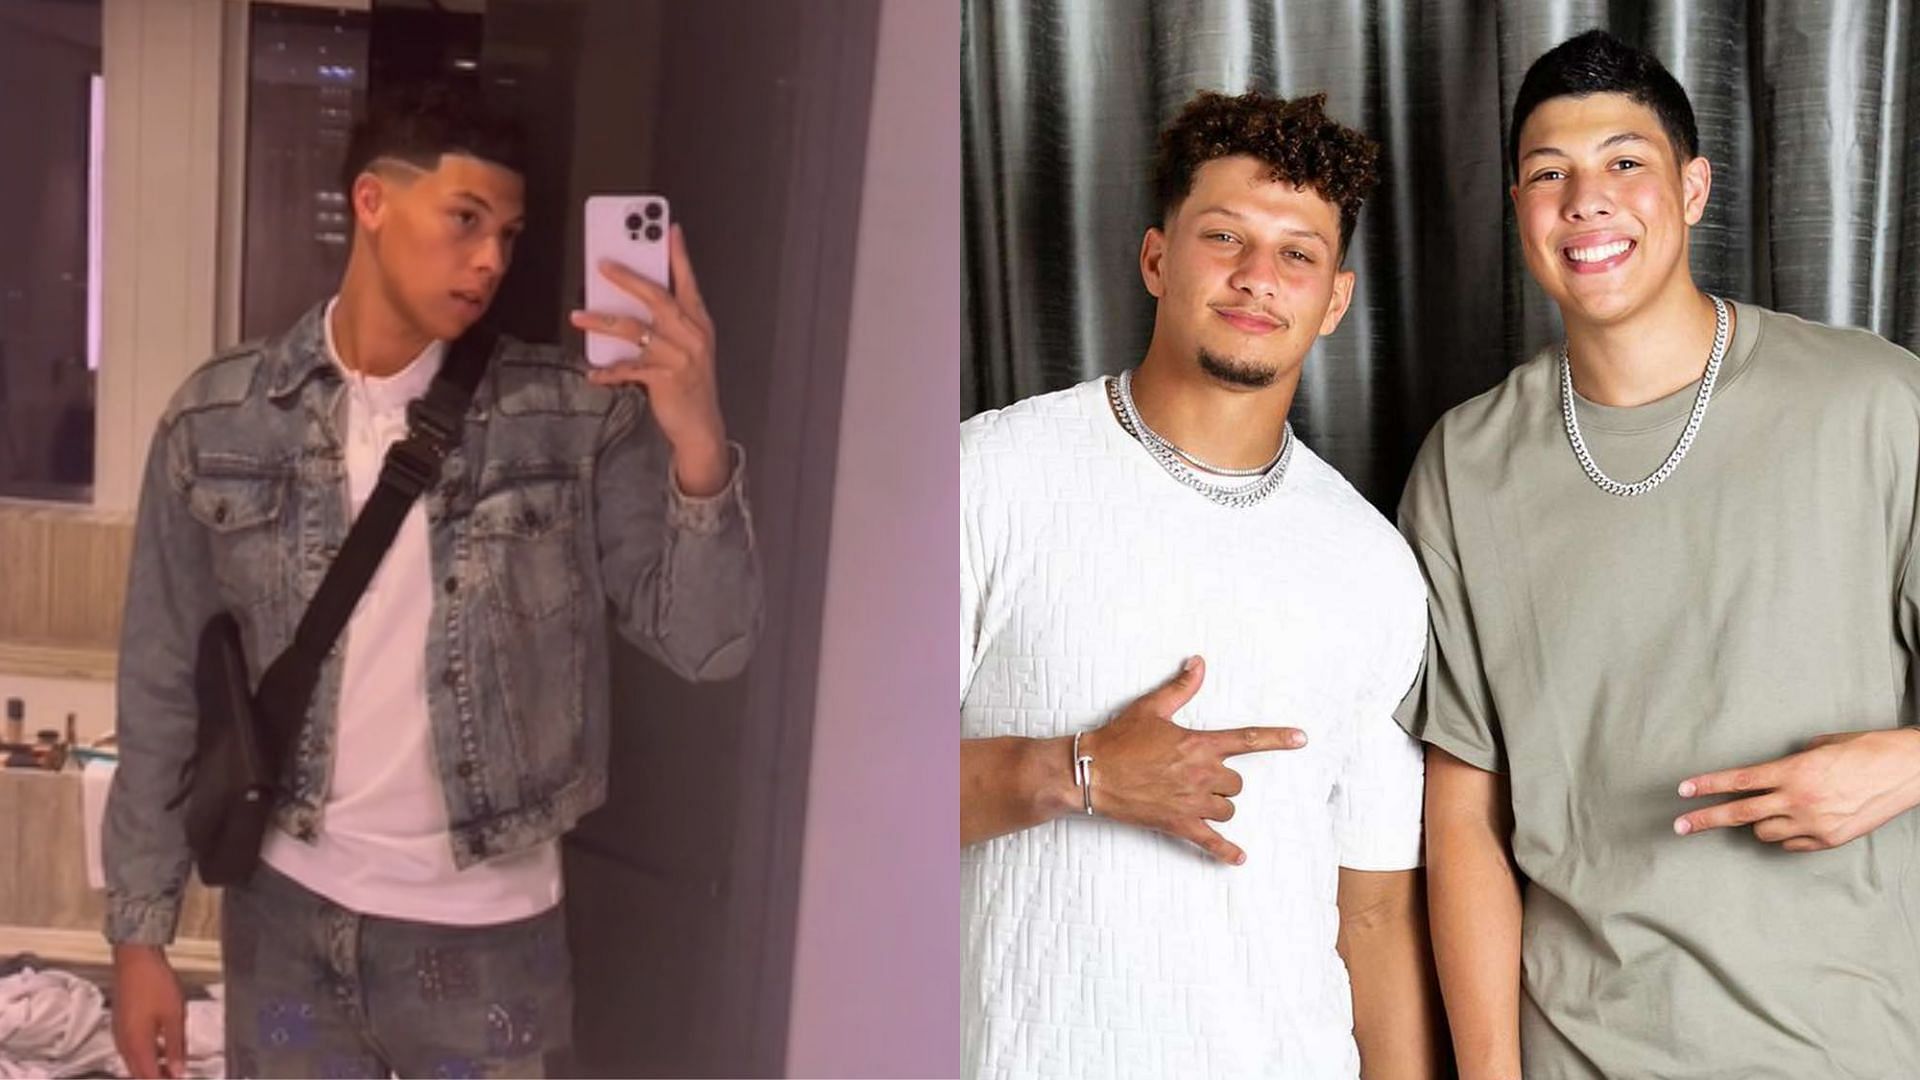 Jackson Mahomes gets trolled by fans after uploading a video on TikTok.